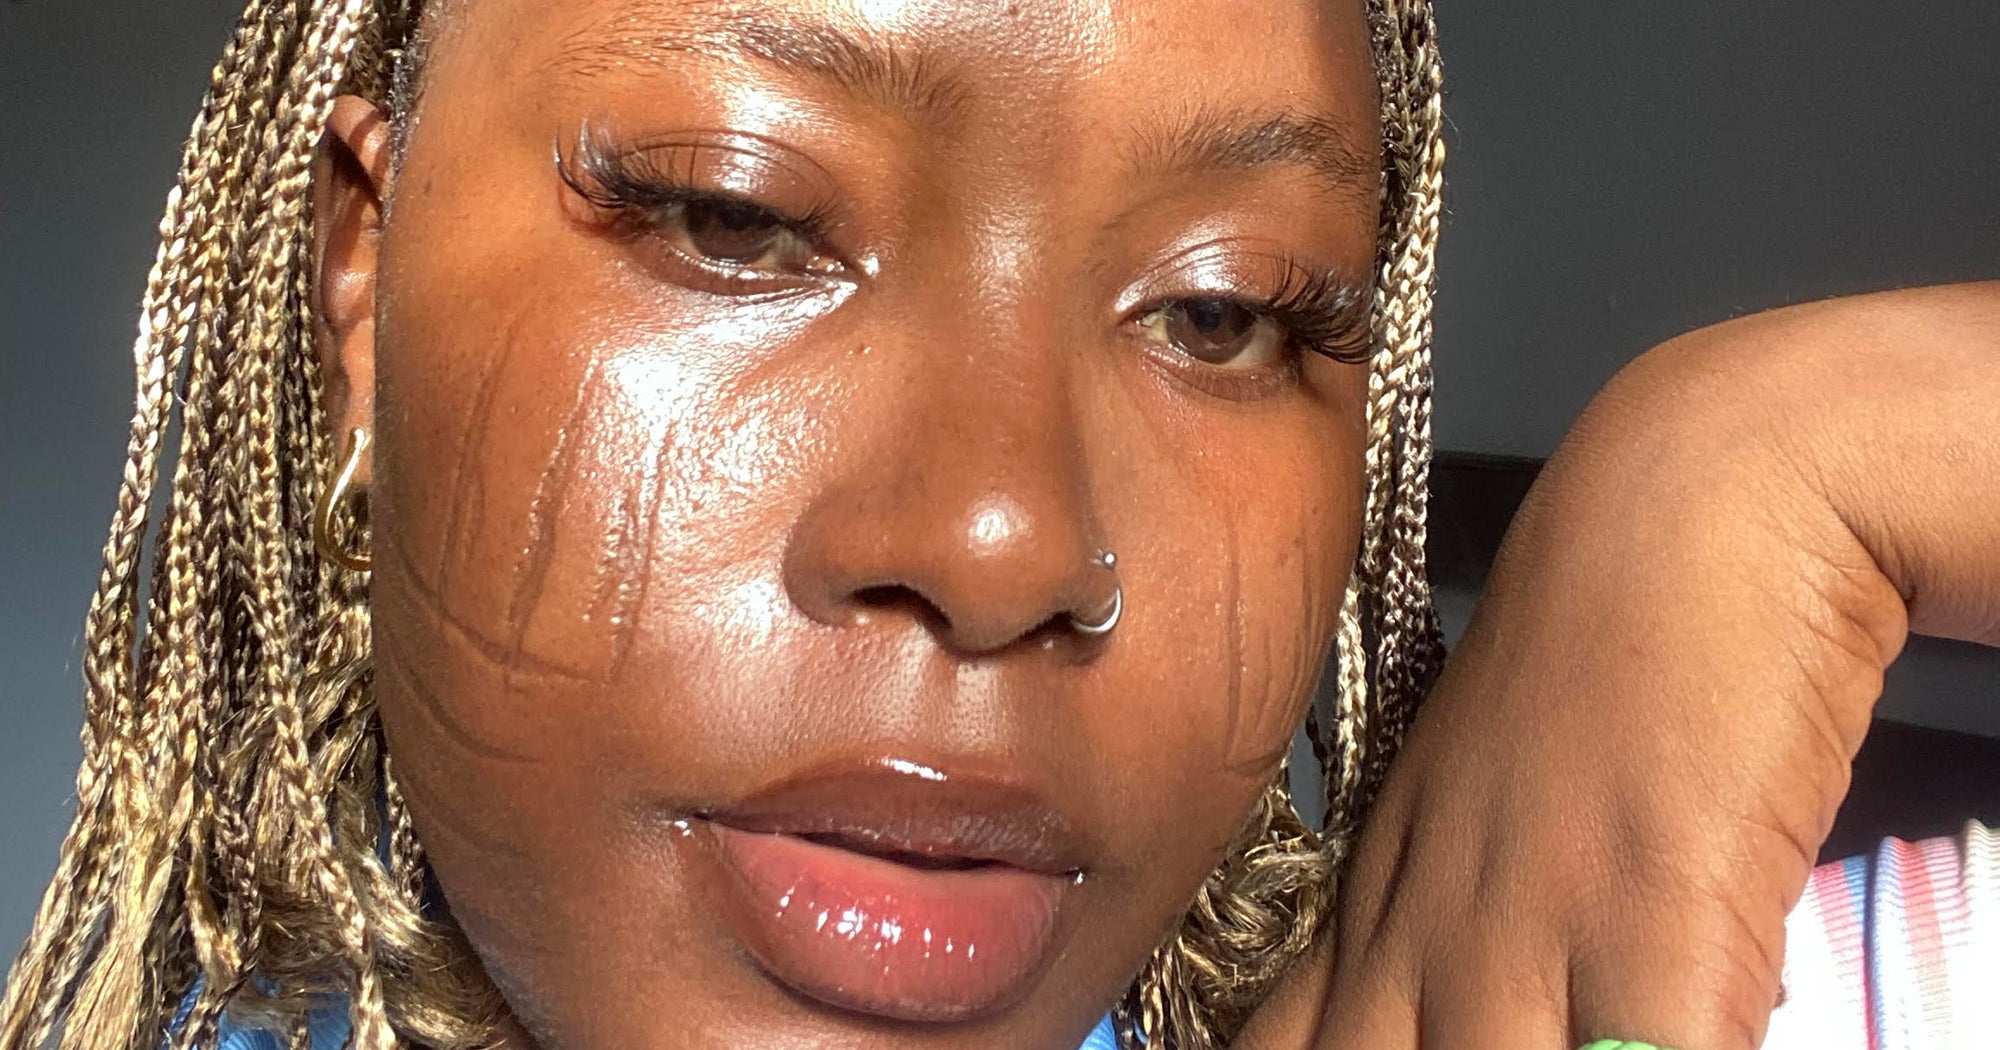 Influencers With Tribal Marks Share The Beauty Of Their Scars